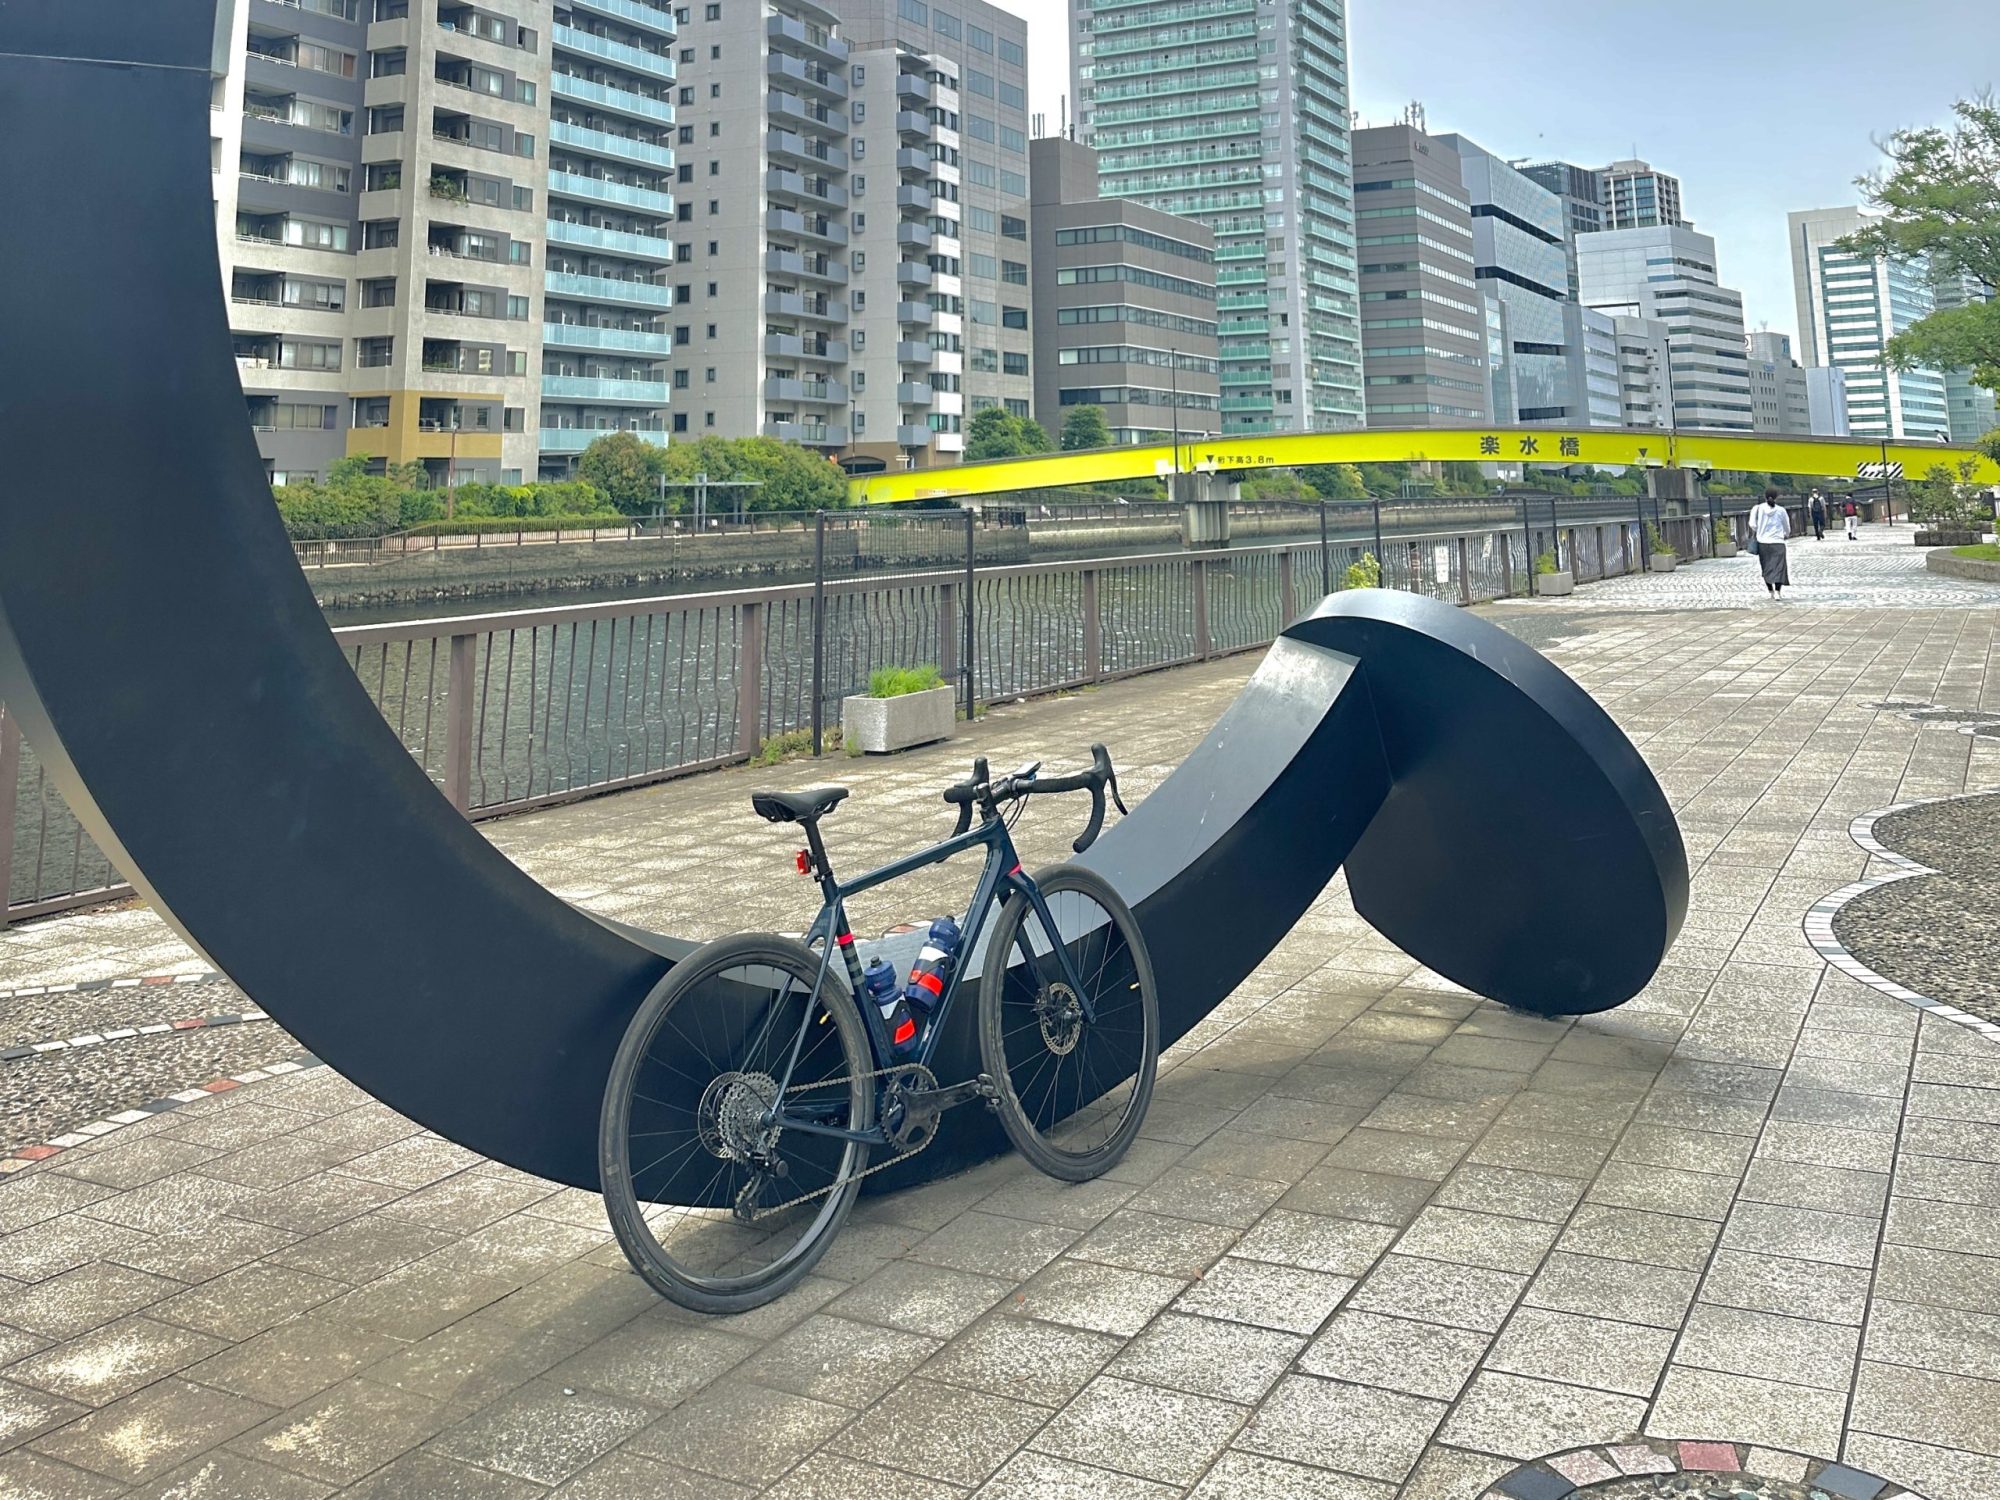 OPEN U.P. Gravel road bike is leaning gains the sculpture in tokyo